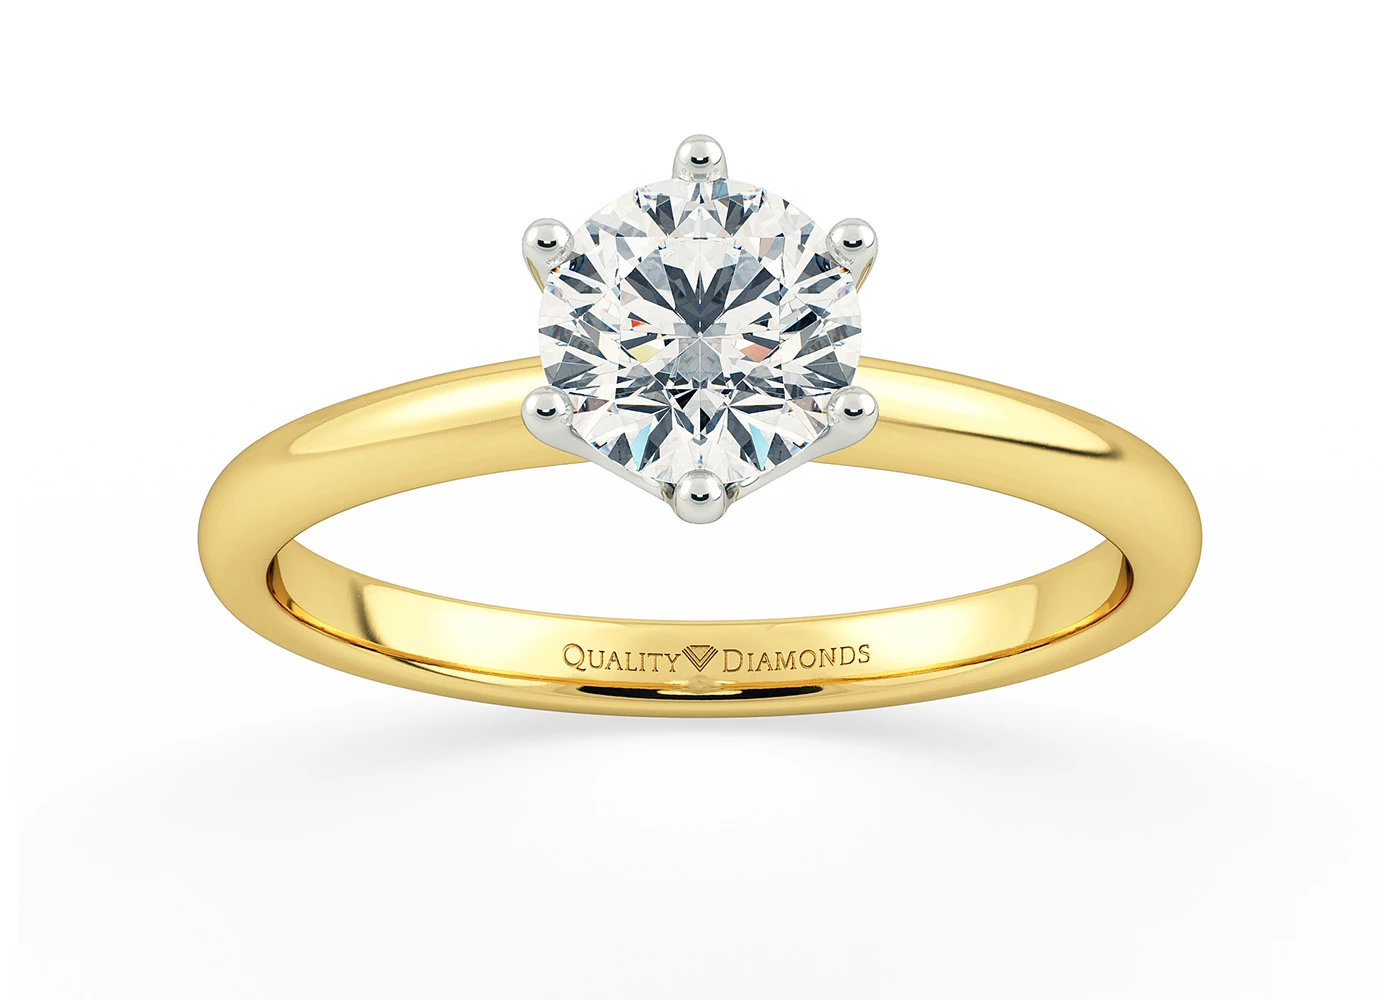 Round Brilliant Amore Diamond Ring in 9K Yellow Gold